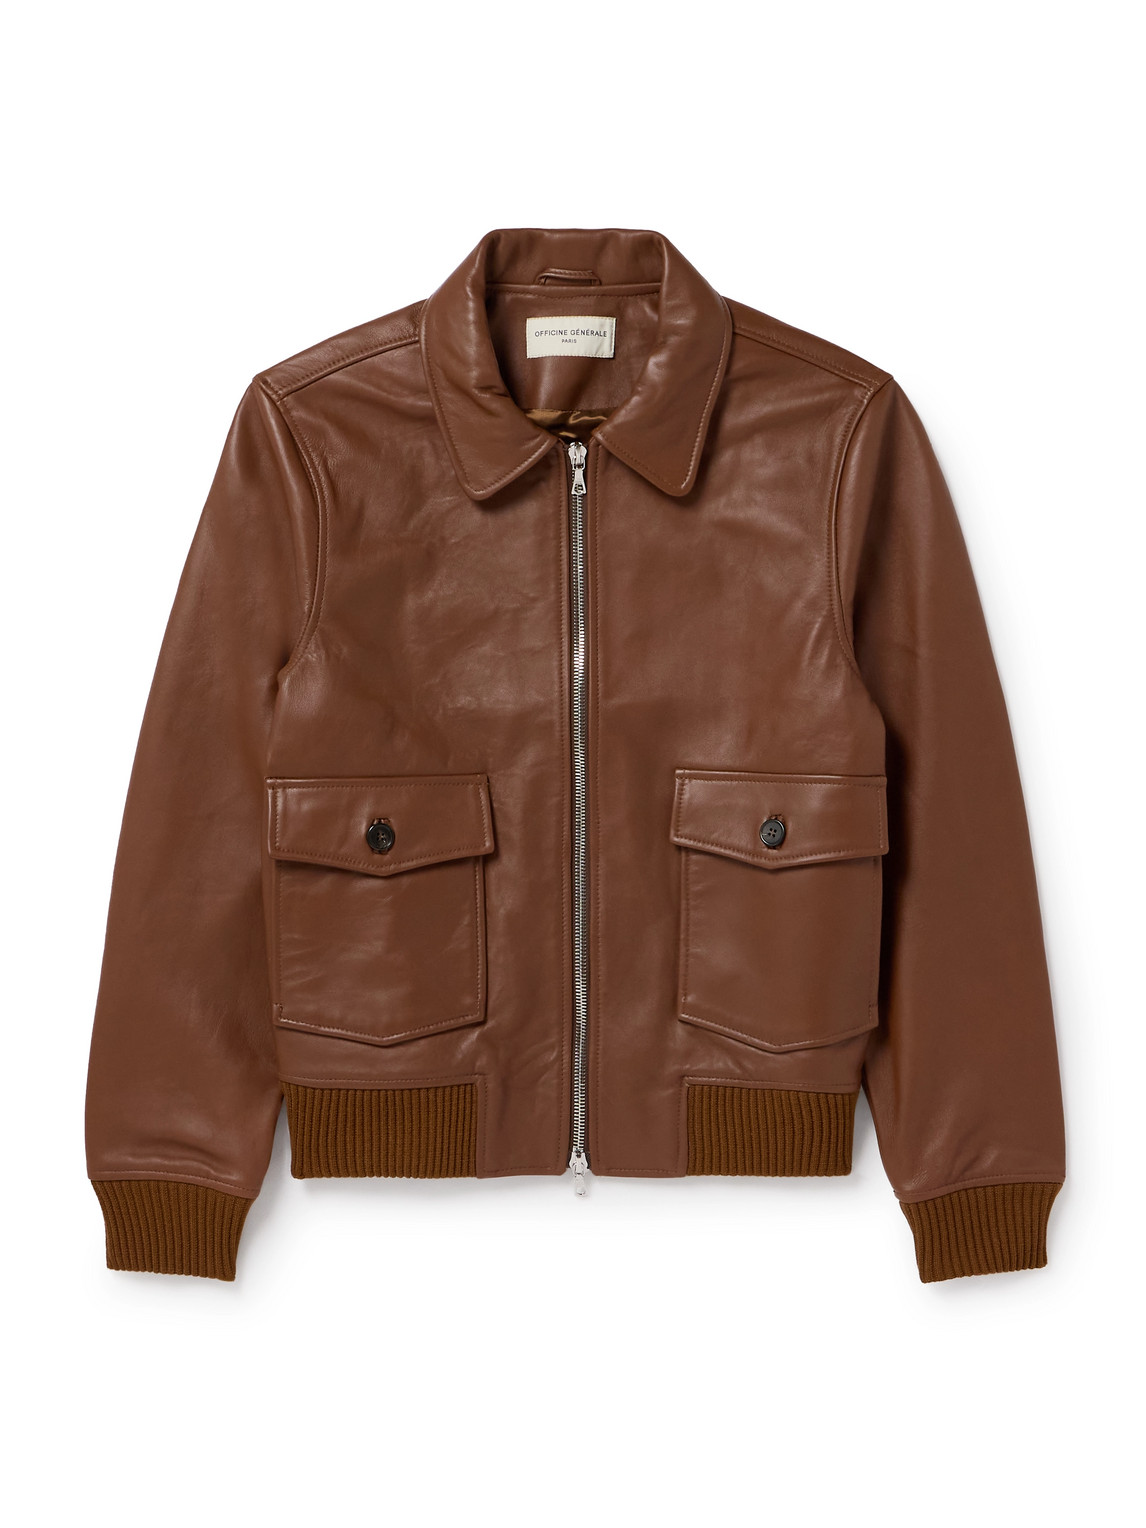 Officine Generale Gianni Leather Bomber Jacket In Brown